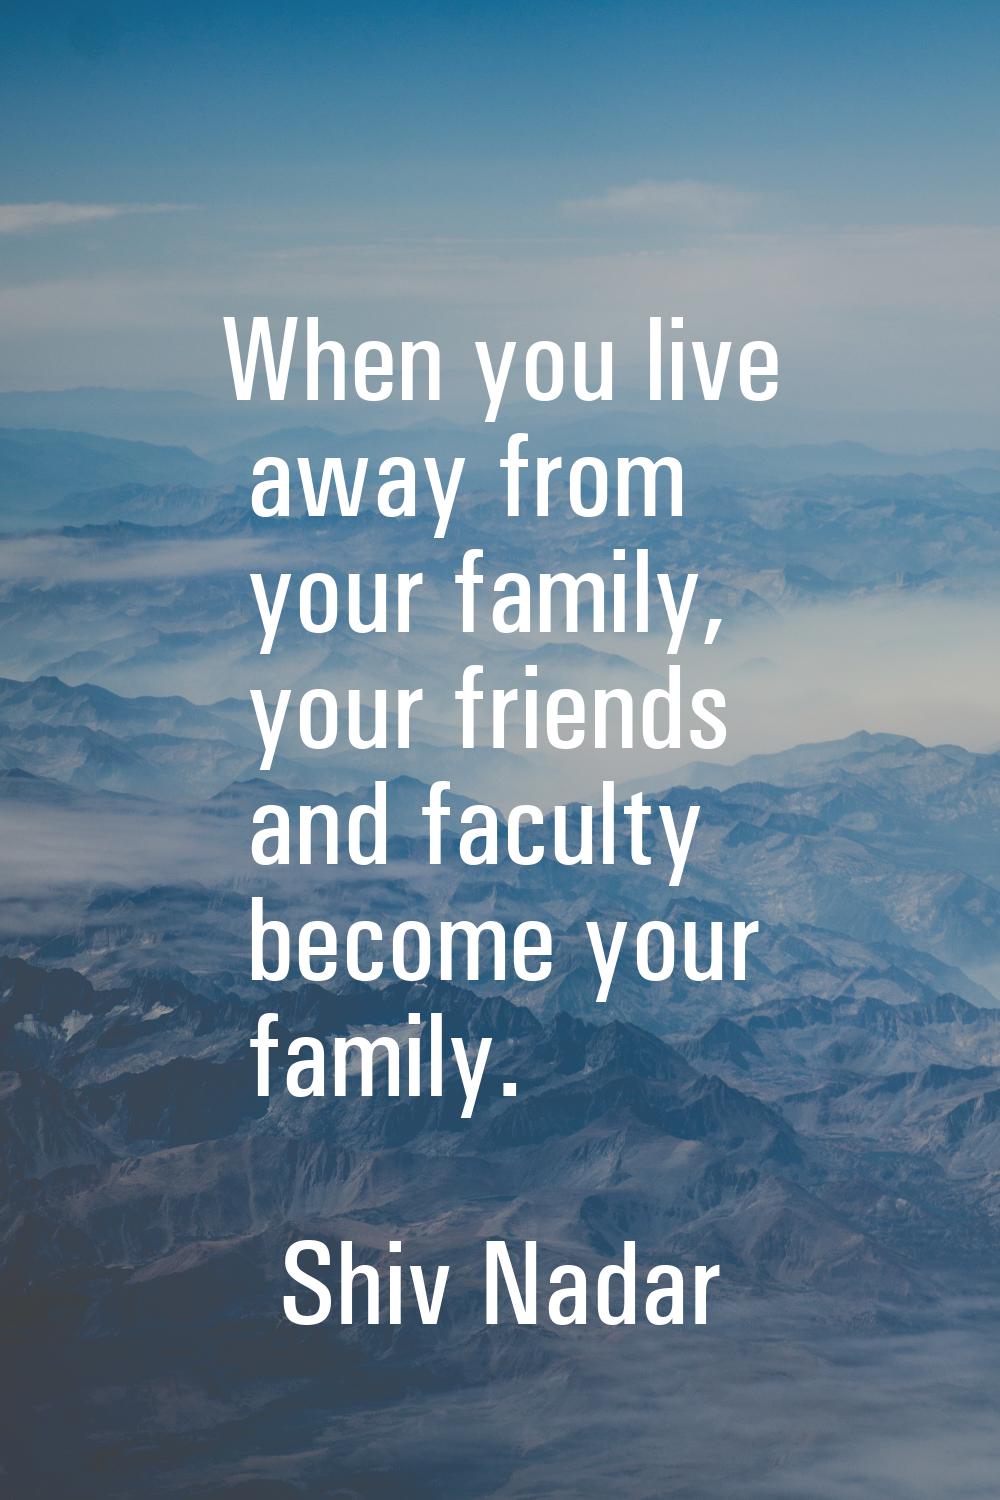 When you live away from your family, your friends and faculty become your family.